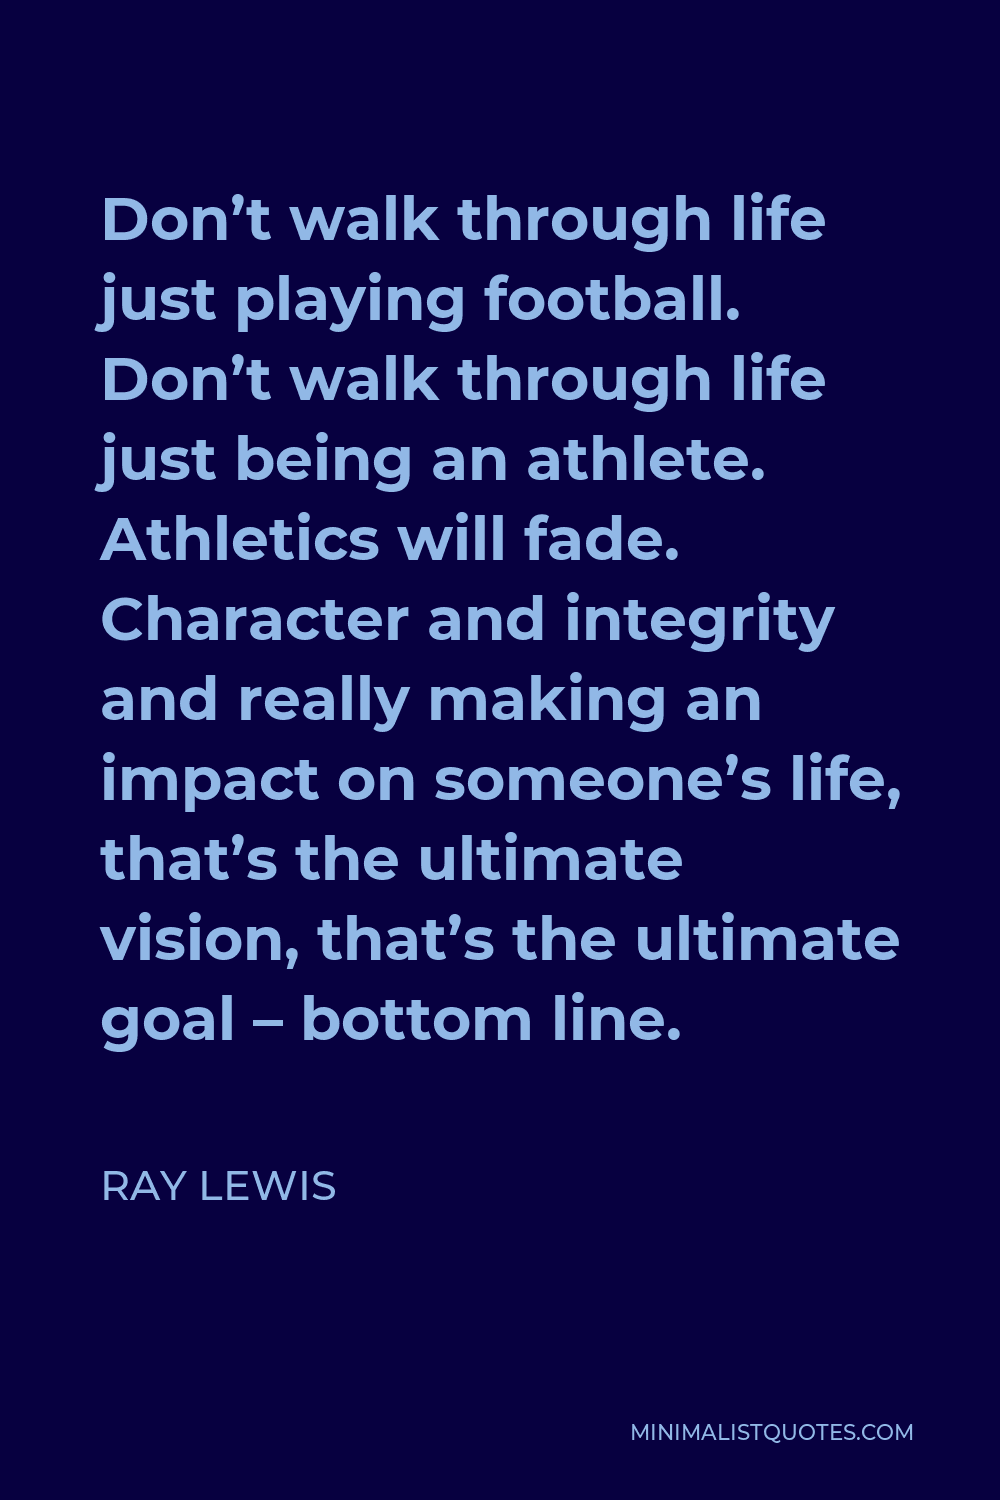 Ray Lewis Quote - Don’t walk through life just playing football. Don’t walk through life just being an athlete. Athletics will fade. Character and integrity and really making an impact on someone’s life, that’s the ultimate vision, that’s the ultimate goal – bottom line.